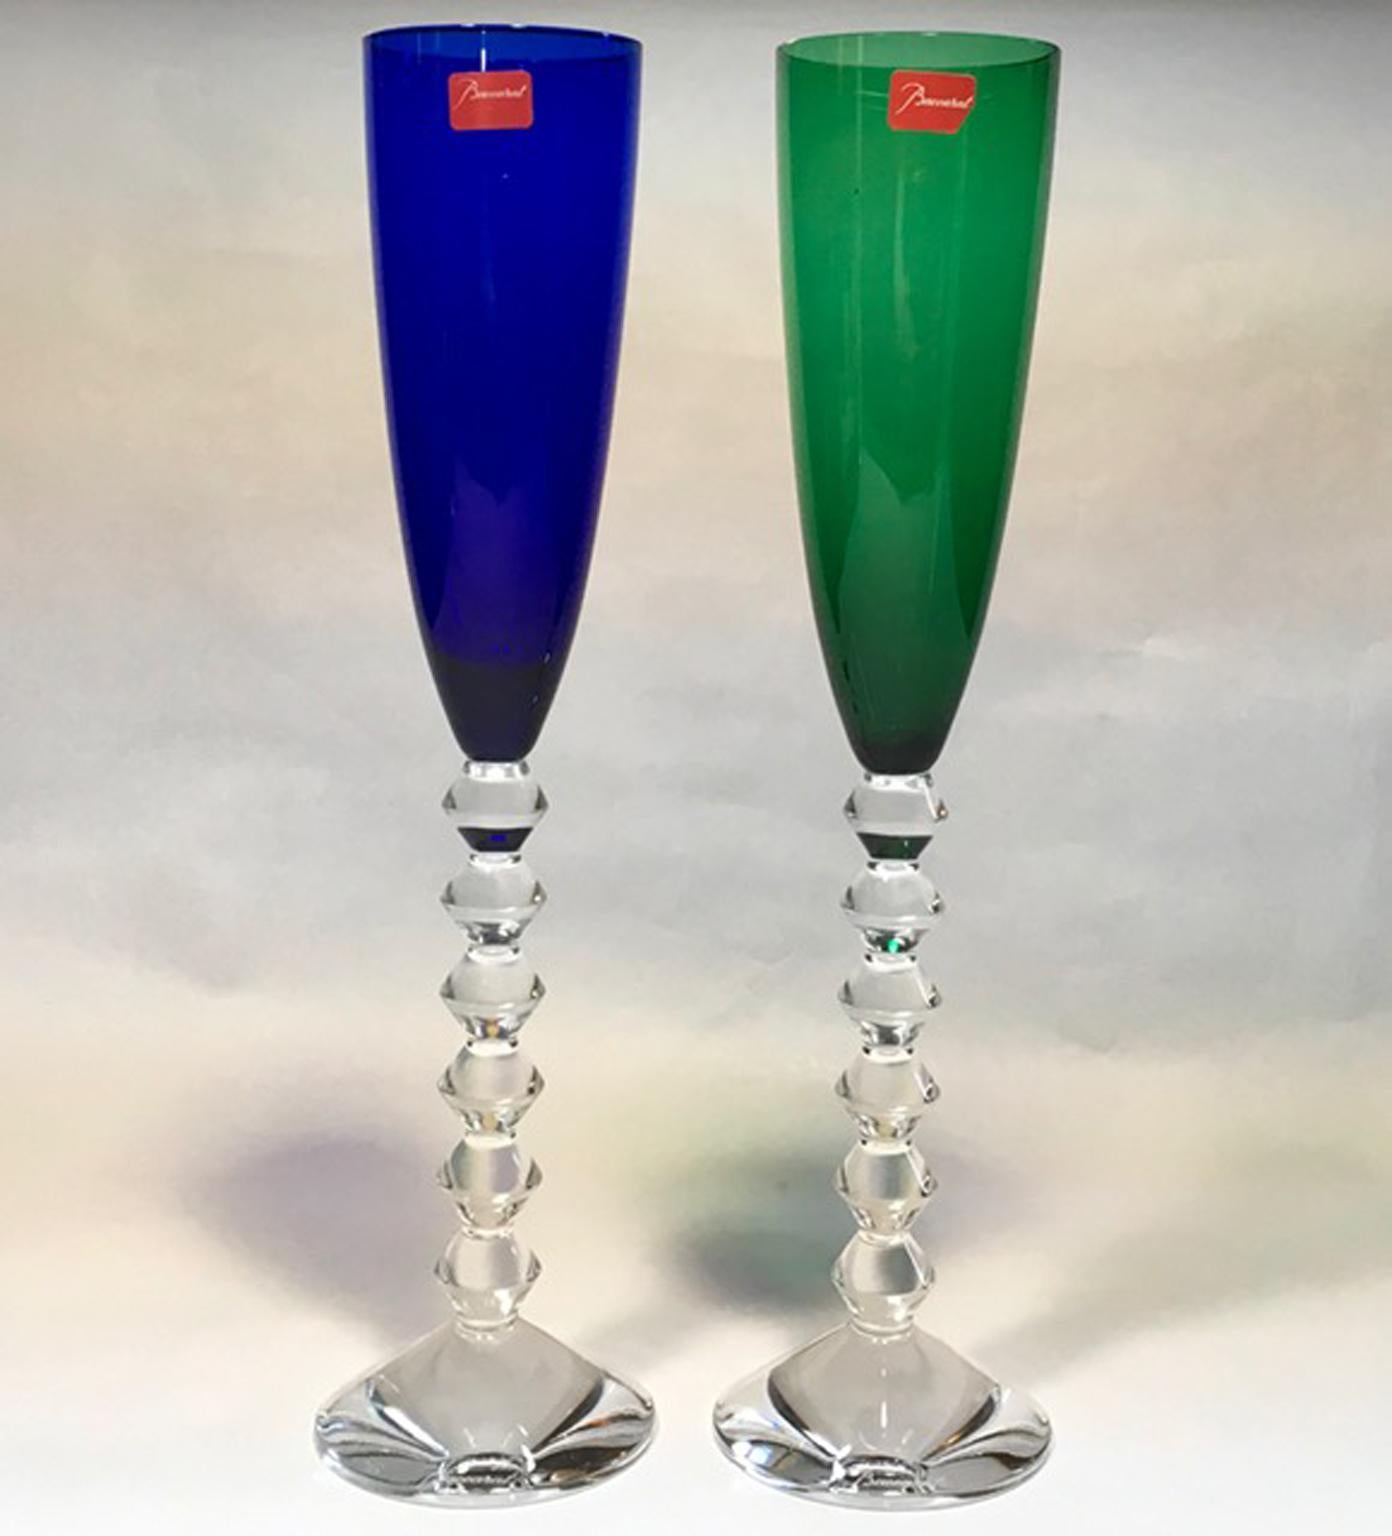 Set of Two Baccarat Green and Blue Crystal Goblets Glasses France, 21st Century 13